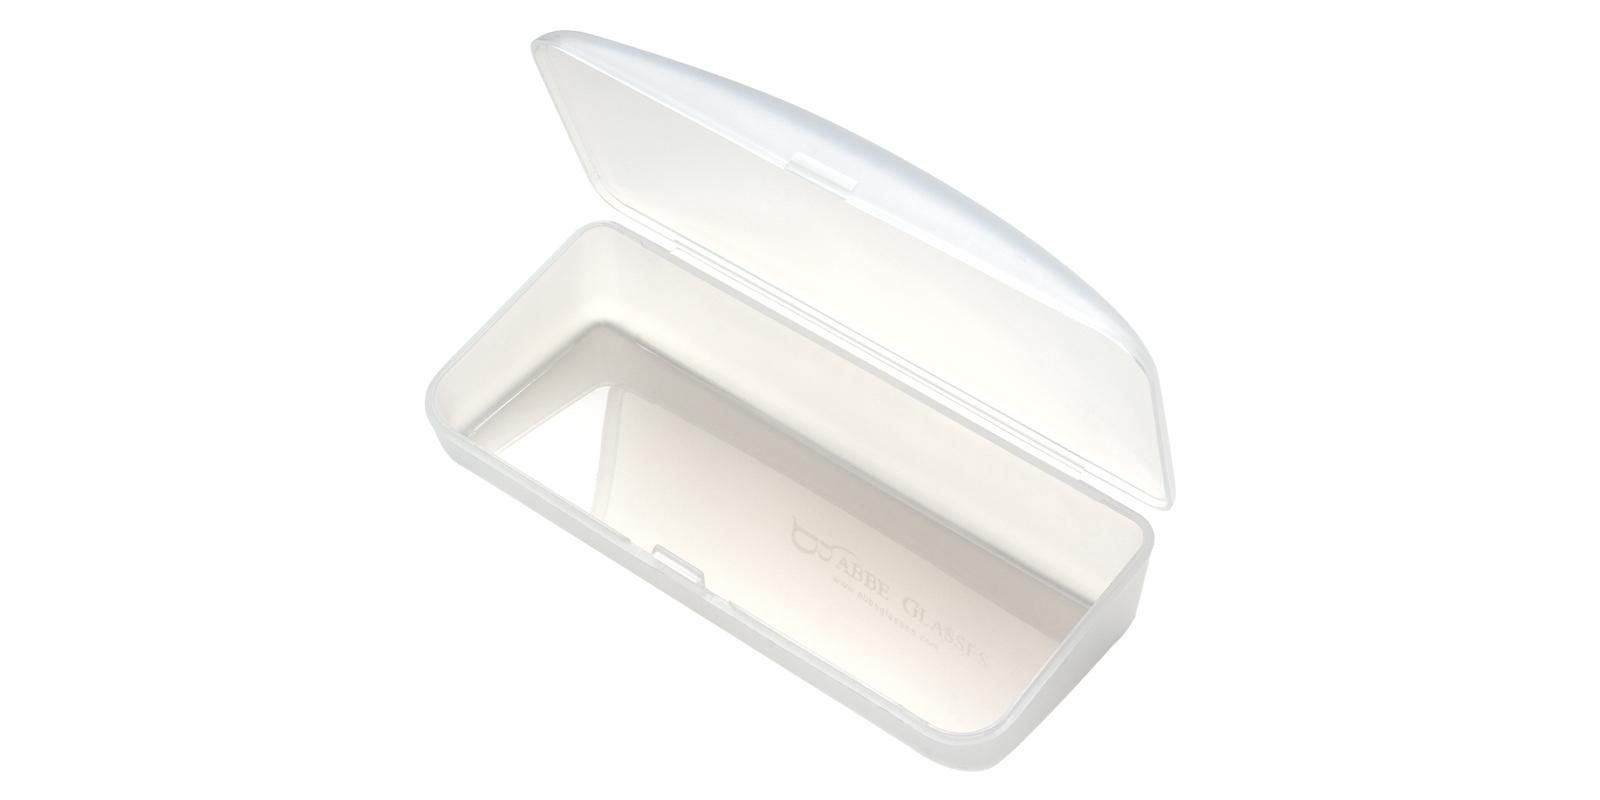 Sunglasses Case Translucent   Frames from ABBE Glasses